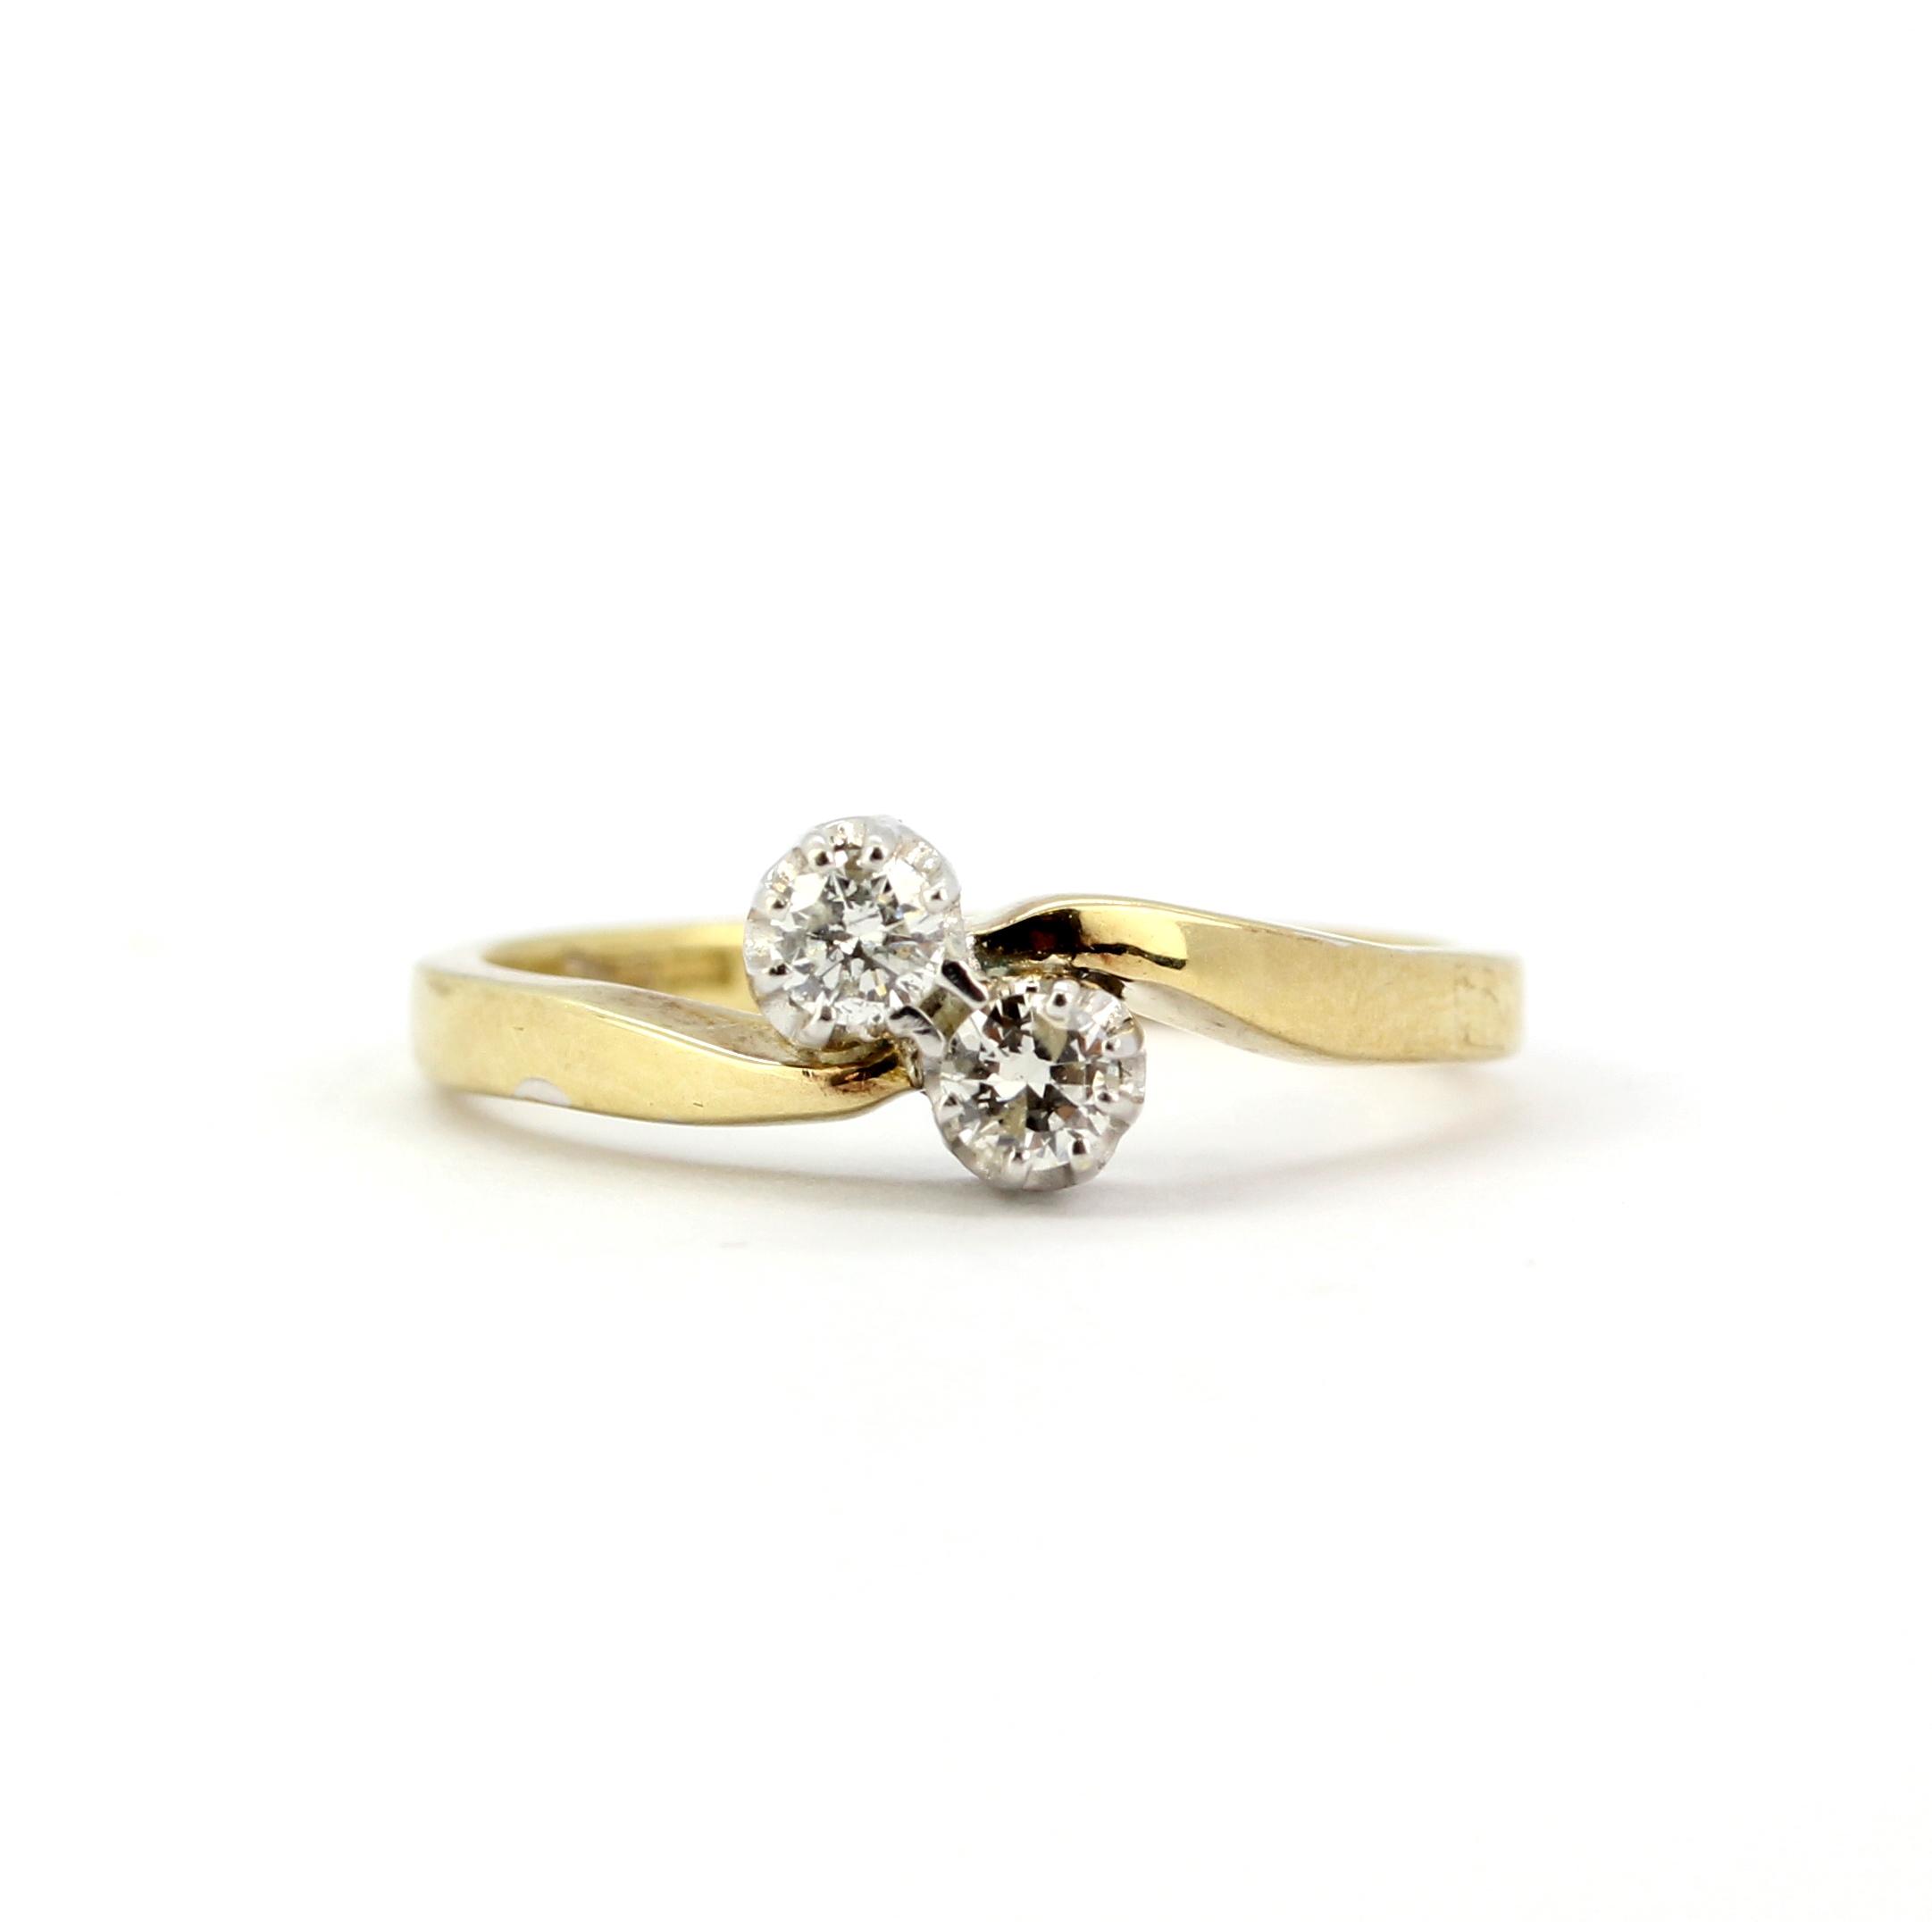 A hallmarked 9ct yellow gold crossover ring set with two brilliant cut diamonds, approx. 0.20ct